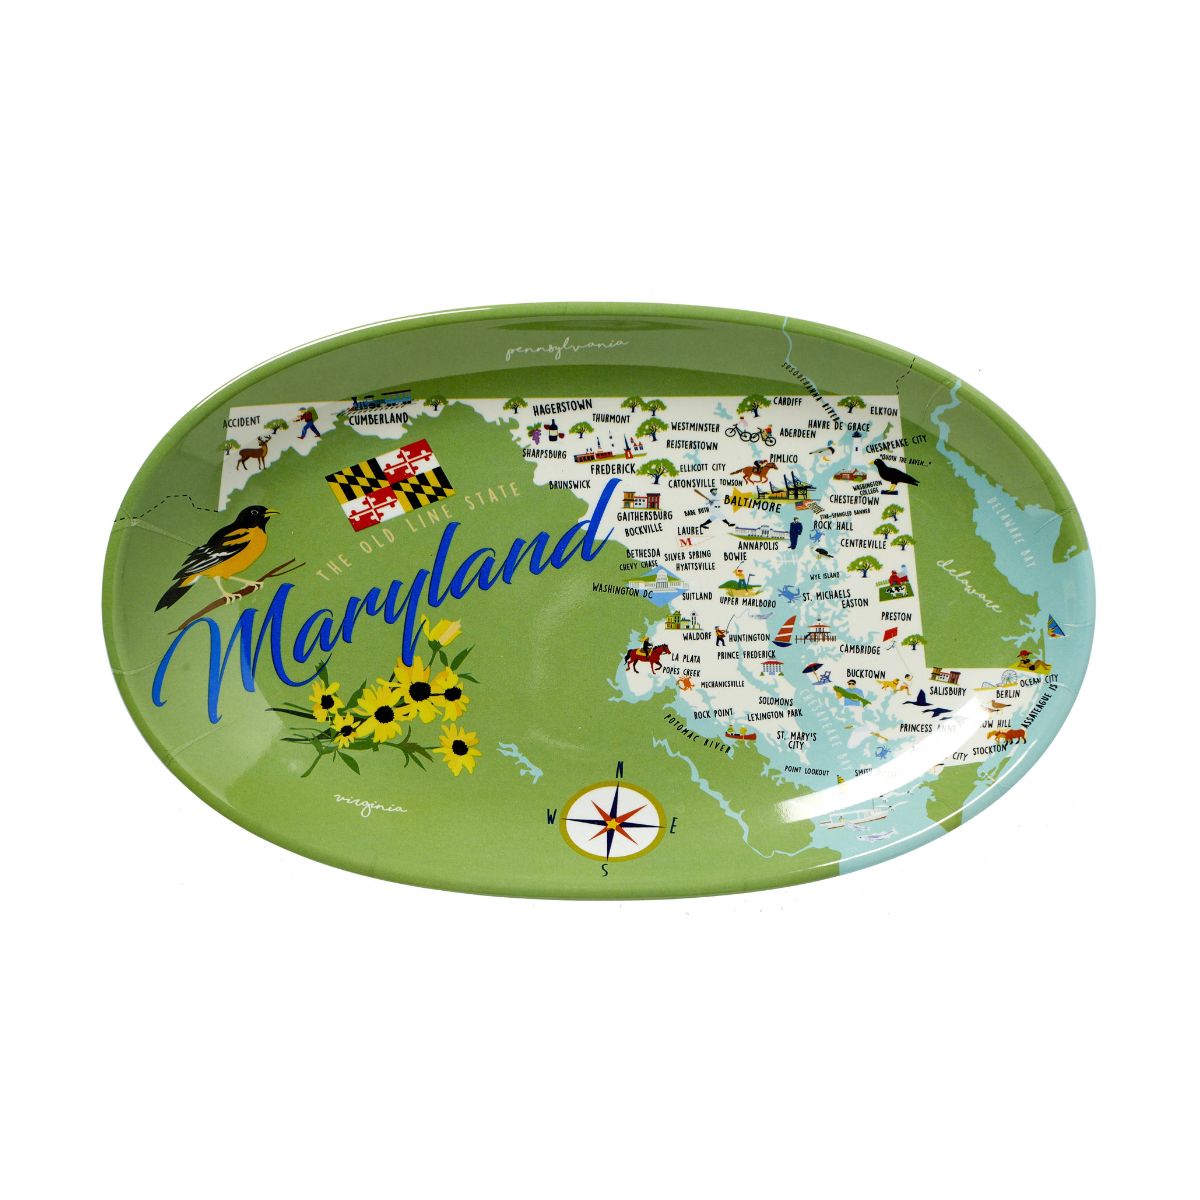 Maryland Tidbit Dish- A Whimsical Depiction of Maryland on a Dish